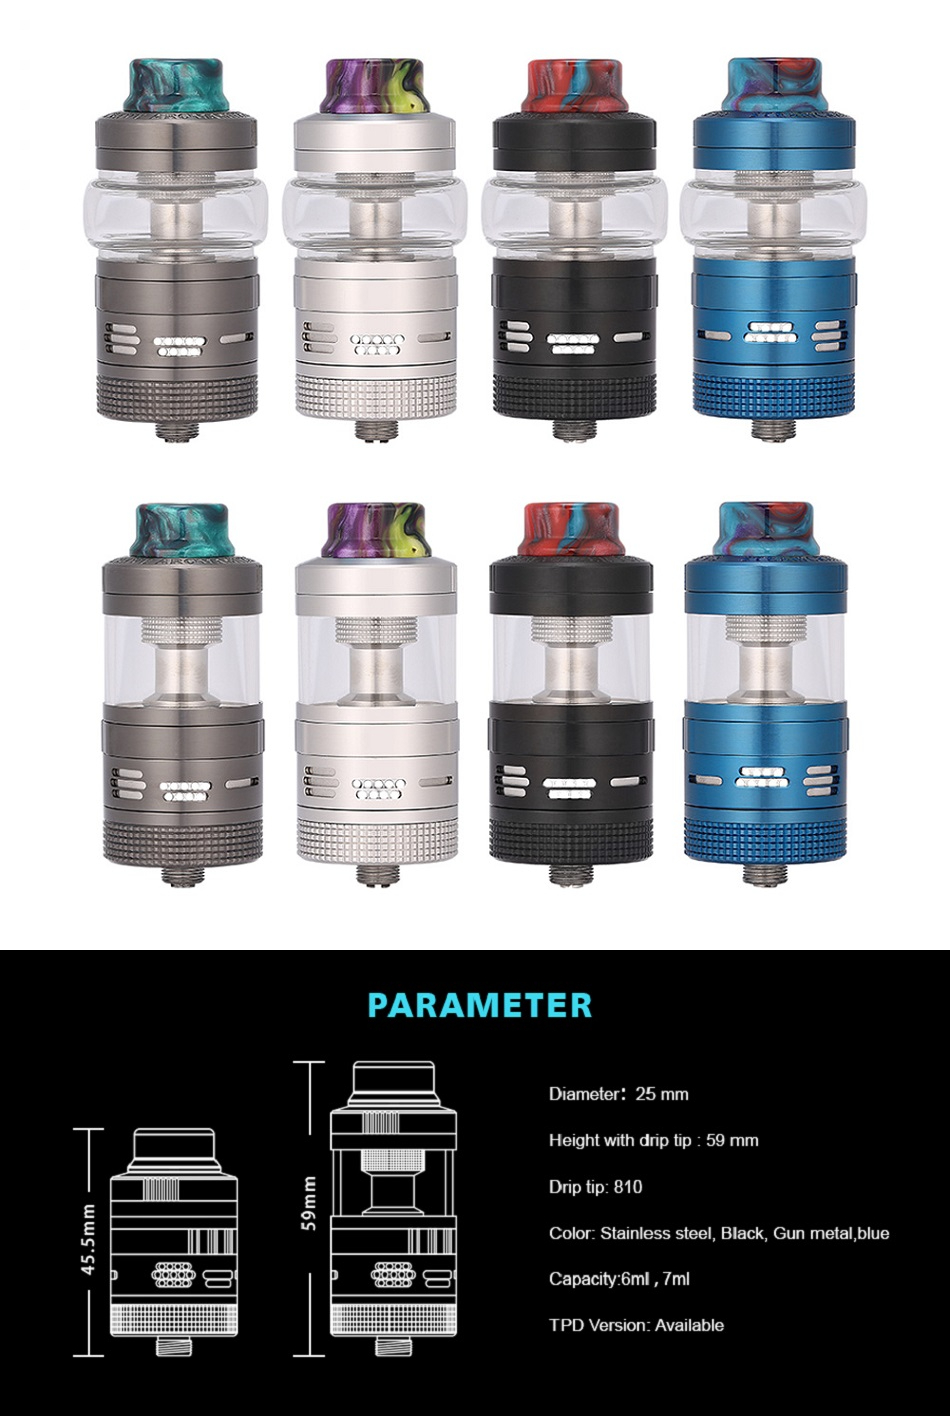 Aromamizer plus rdta by steam crave фото 44